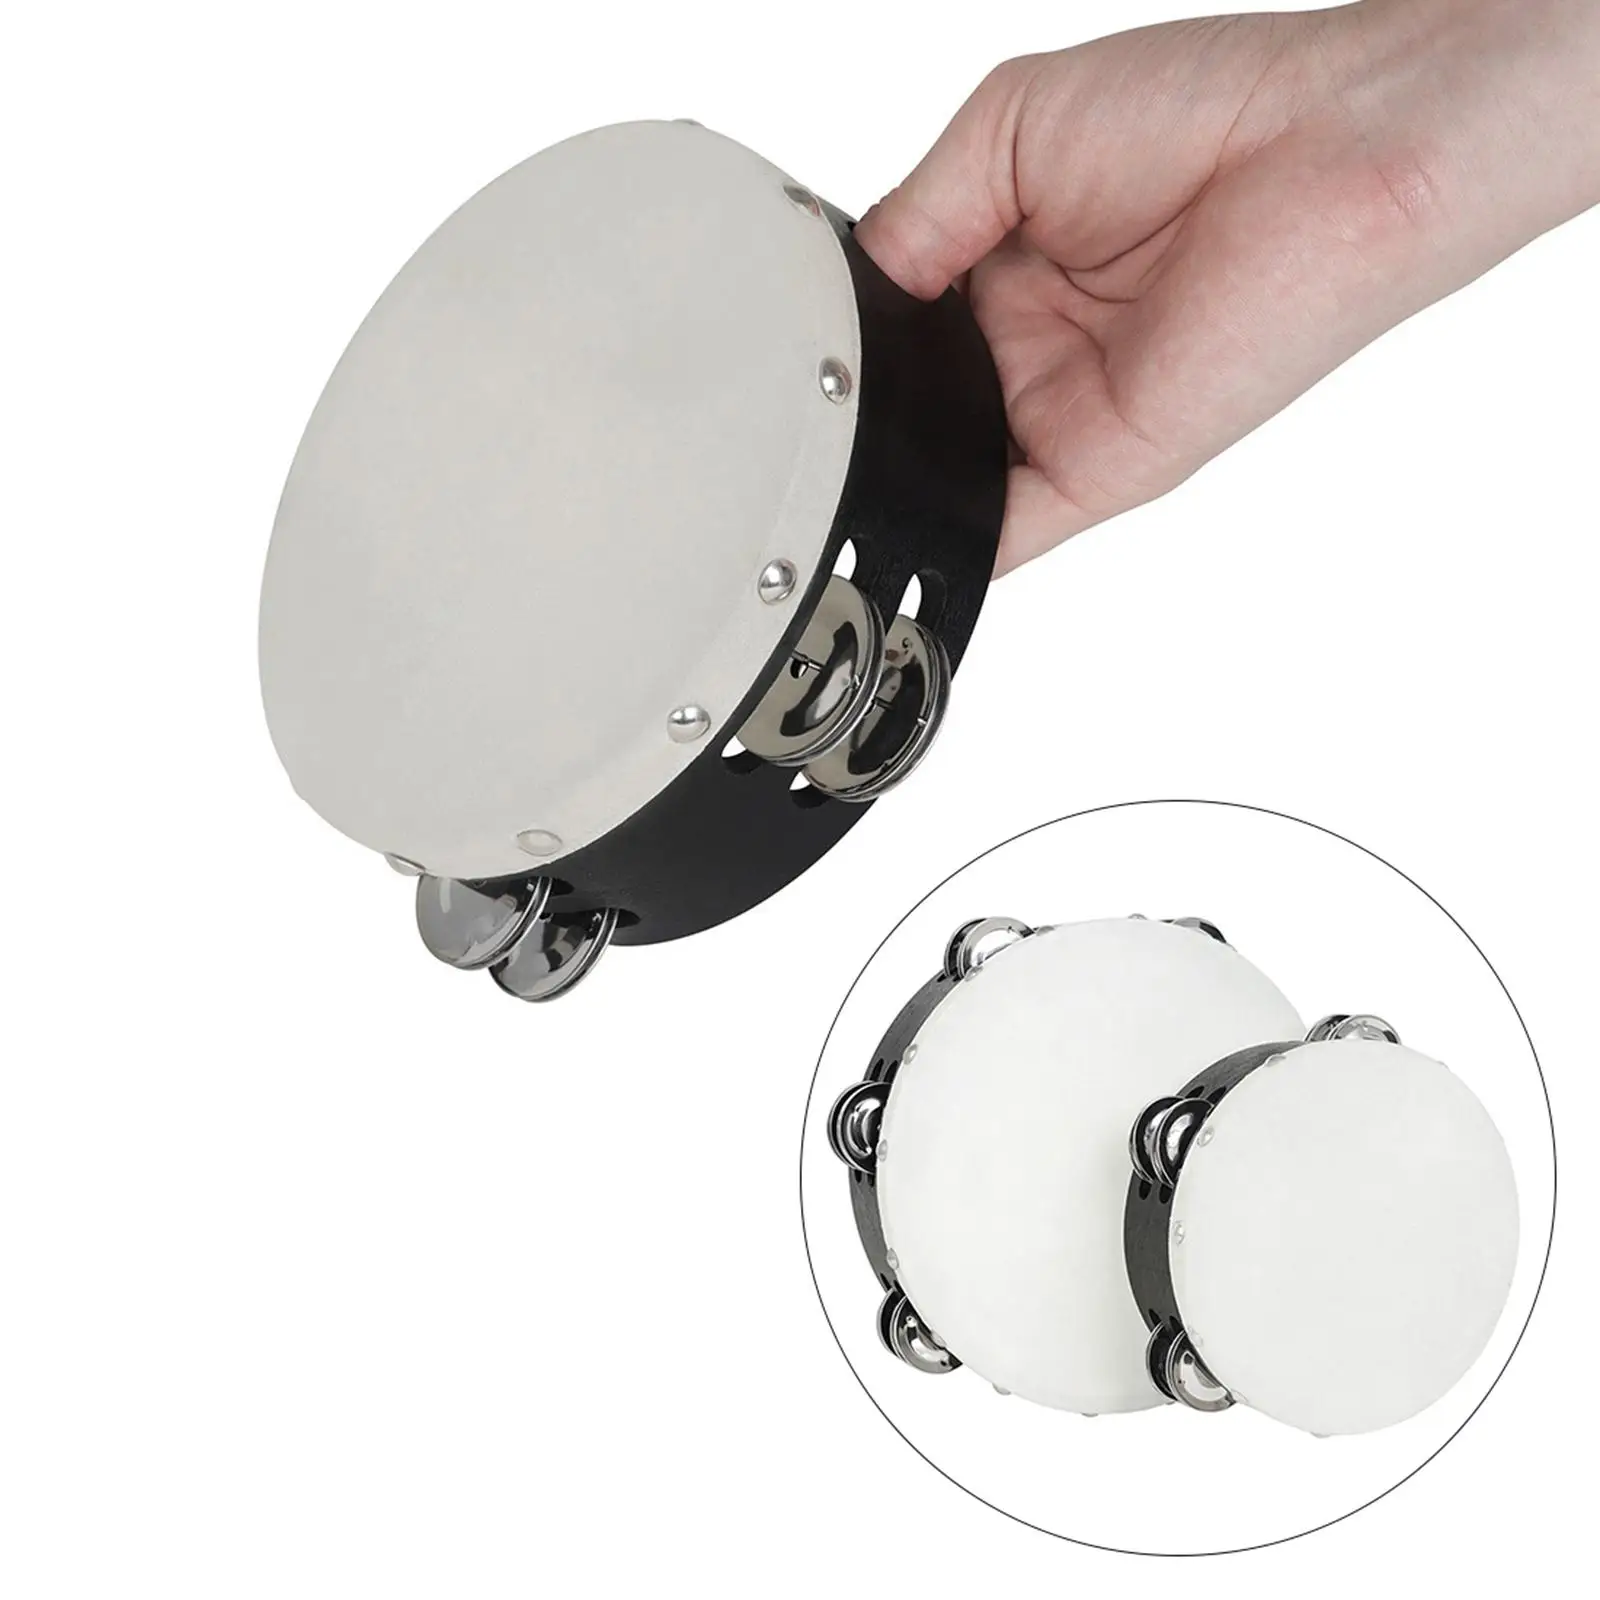 2Pcs 8in 6in Tambourine Hand Percussion Metal Bell Drum Manual Wooden Tambourine for Games Family Activity Church Kids